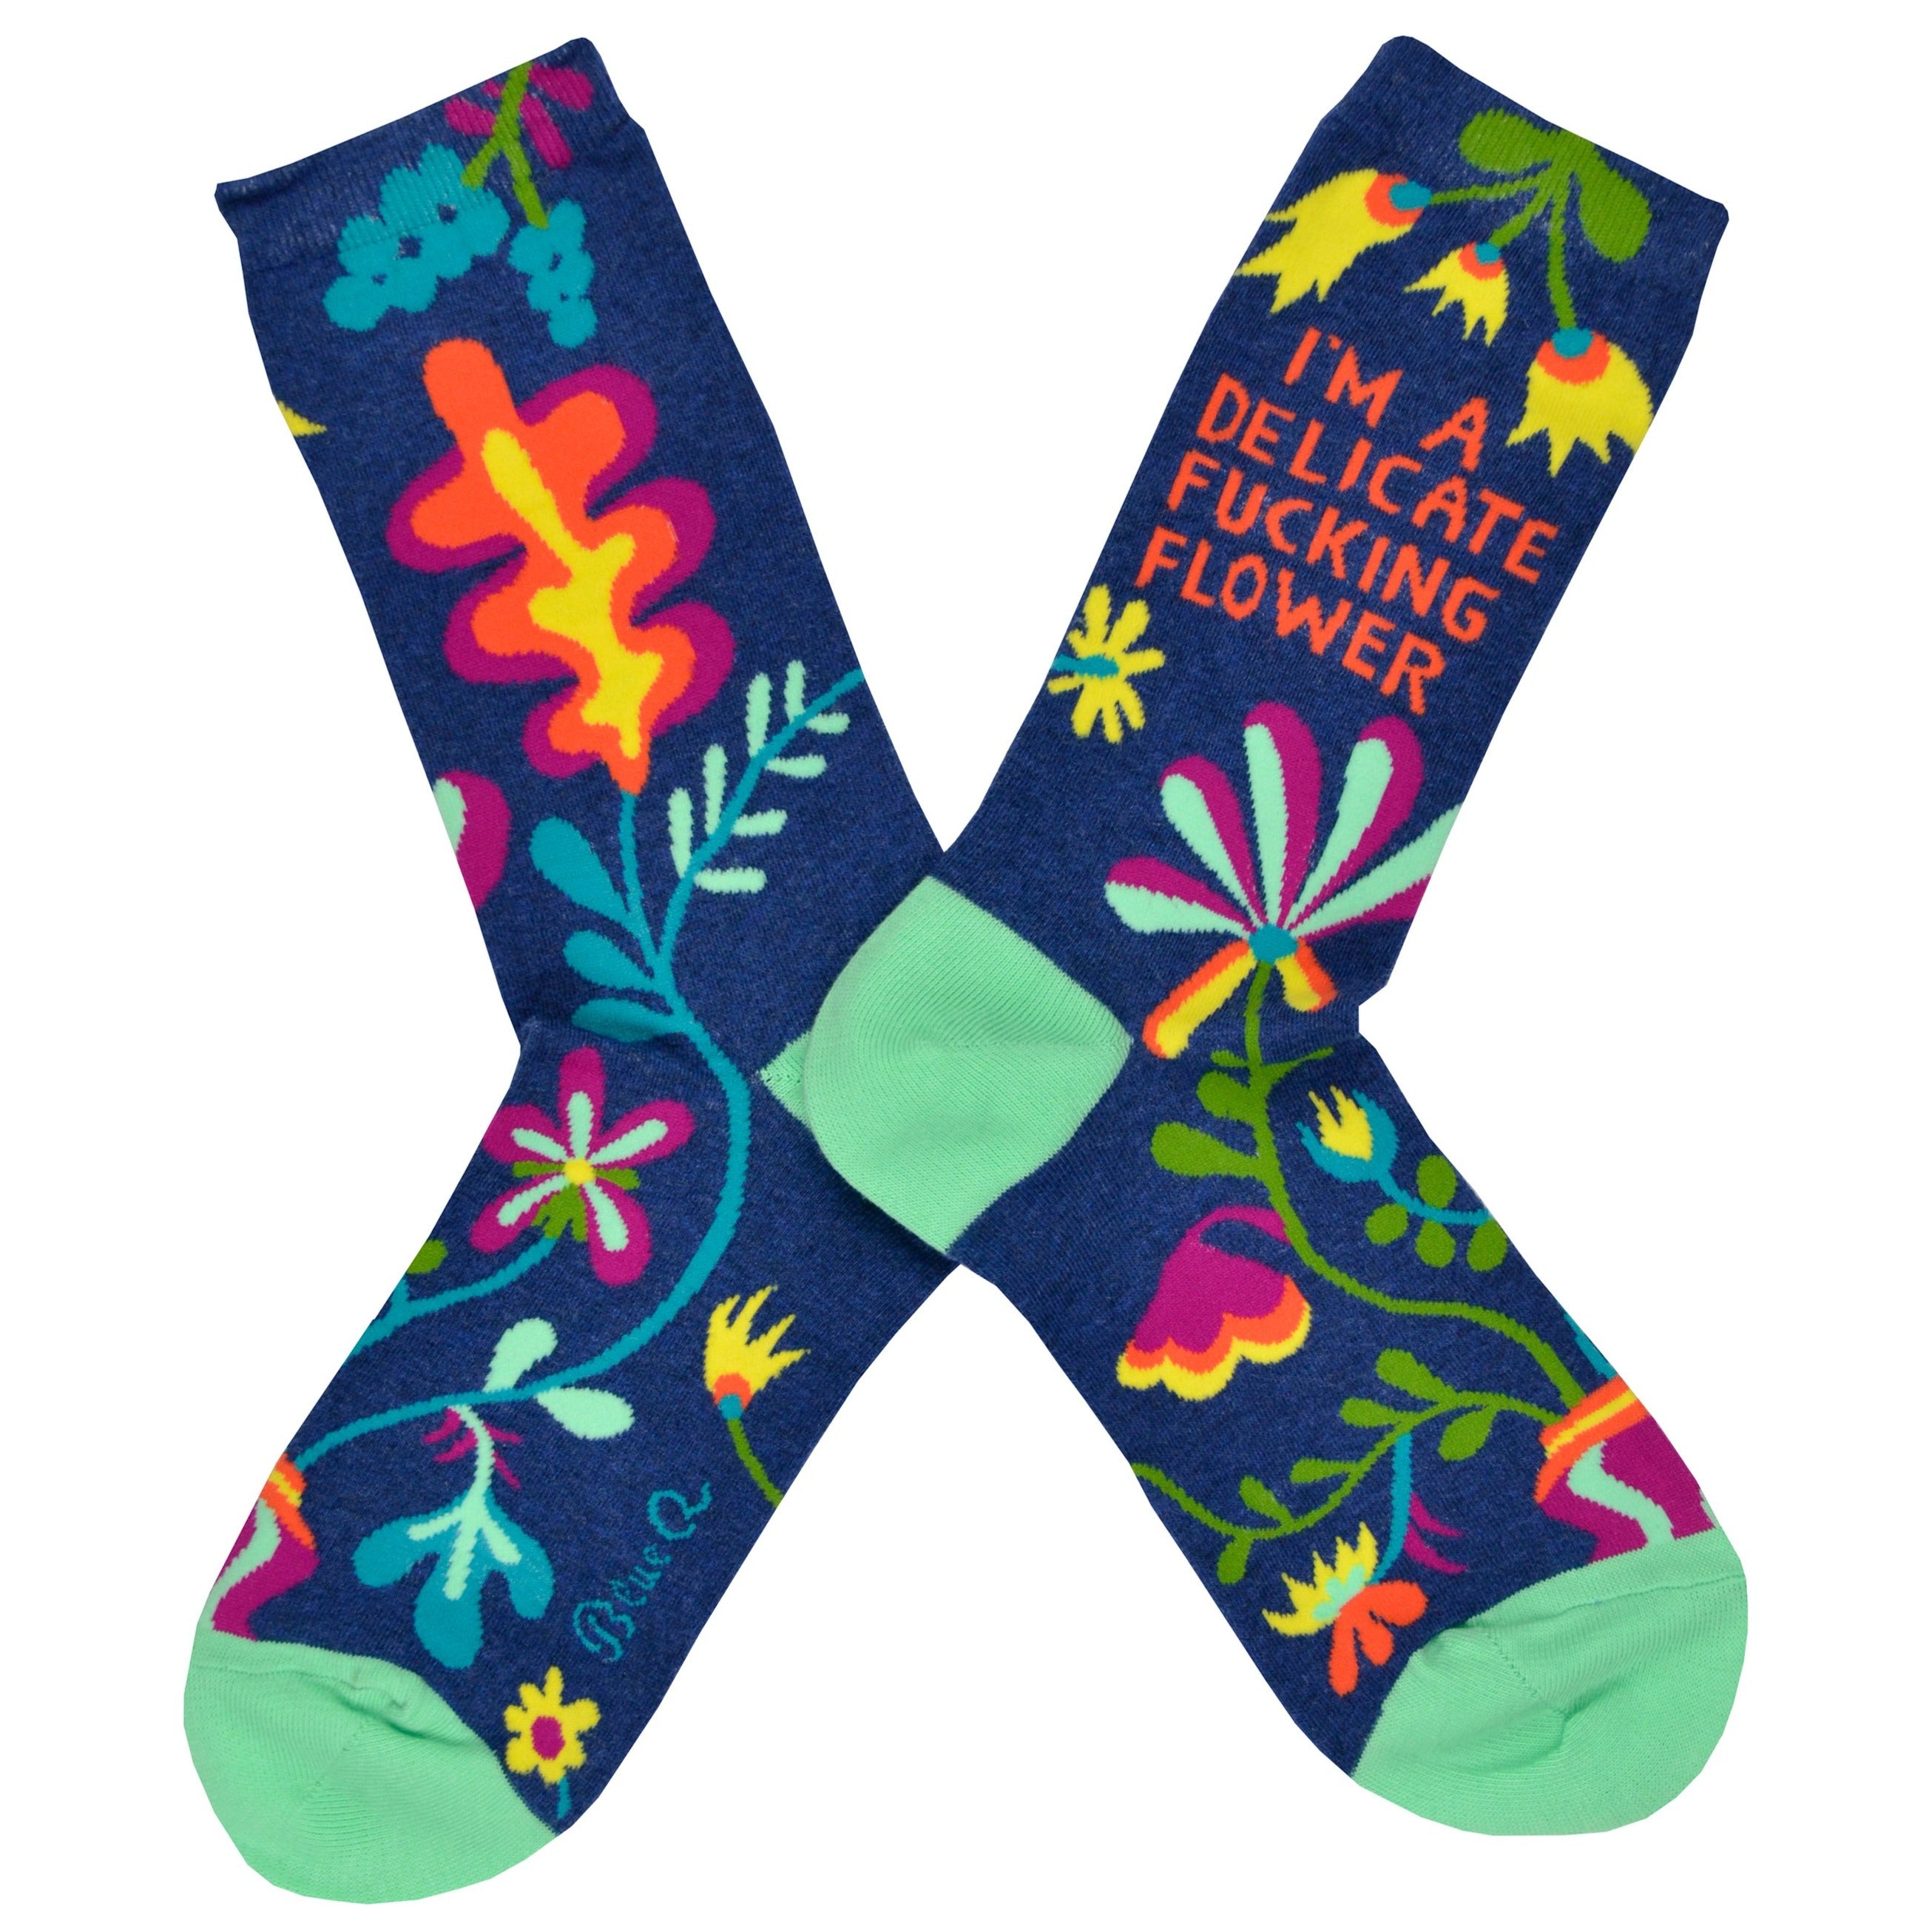 Shown in a flatlay, a pair of Blue Q brand women's nylon and combed cotton socks in navy blue with a teal heel and toe. These socks feature an all over motif of psychedelic inspired flowers and the phrase 